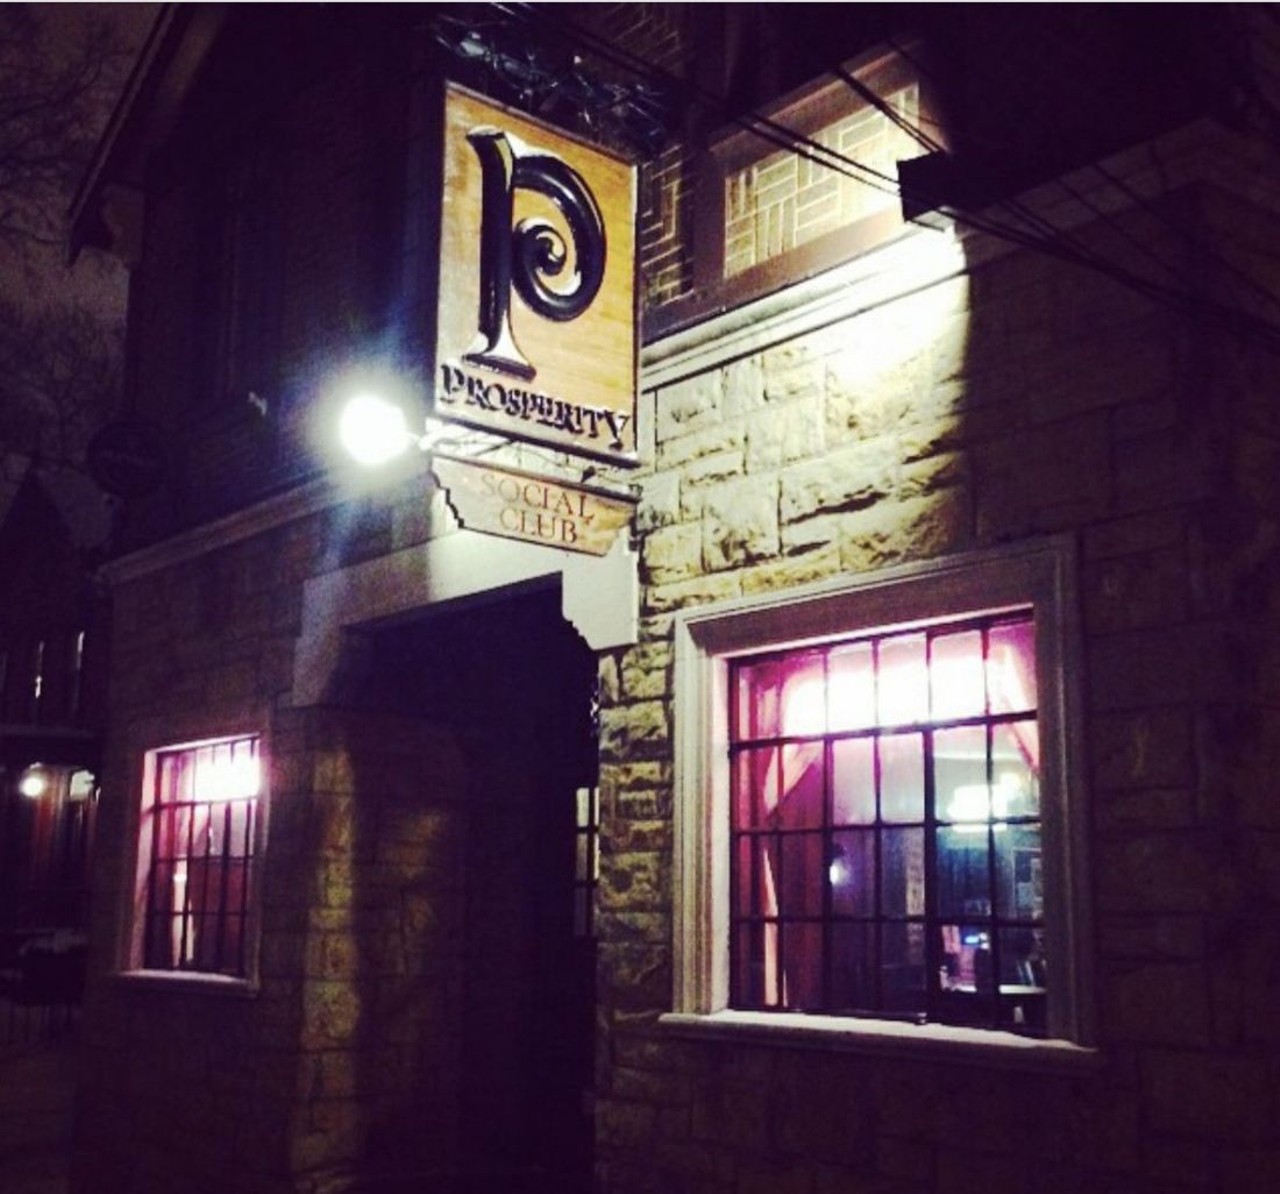  Prosperity Social Club
1109 Starkweather Ave., Cleveland
Cozy and retro, this former workingman&#146;s watering hole serves up delicious food, booze, and a bowling machine along with the live music. They have a kitchen that stays open nightly until midnight and brunch on Saturdays and Sundays.
Photo via @ProsperitySocialClub/Instagram